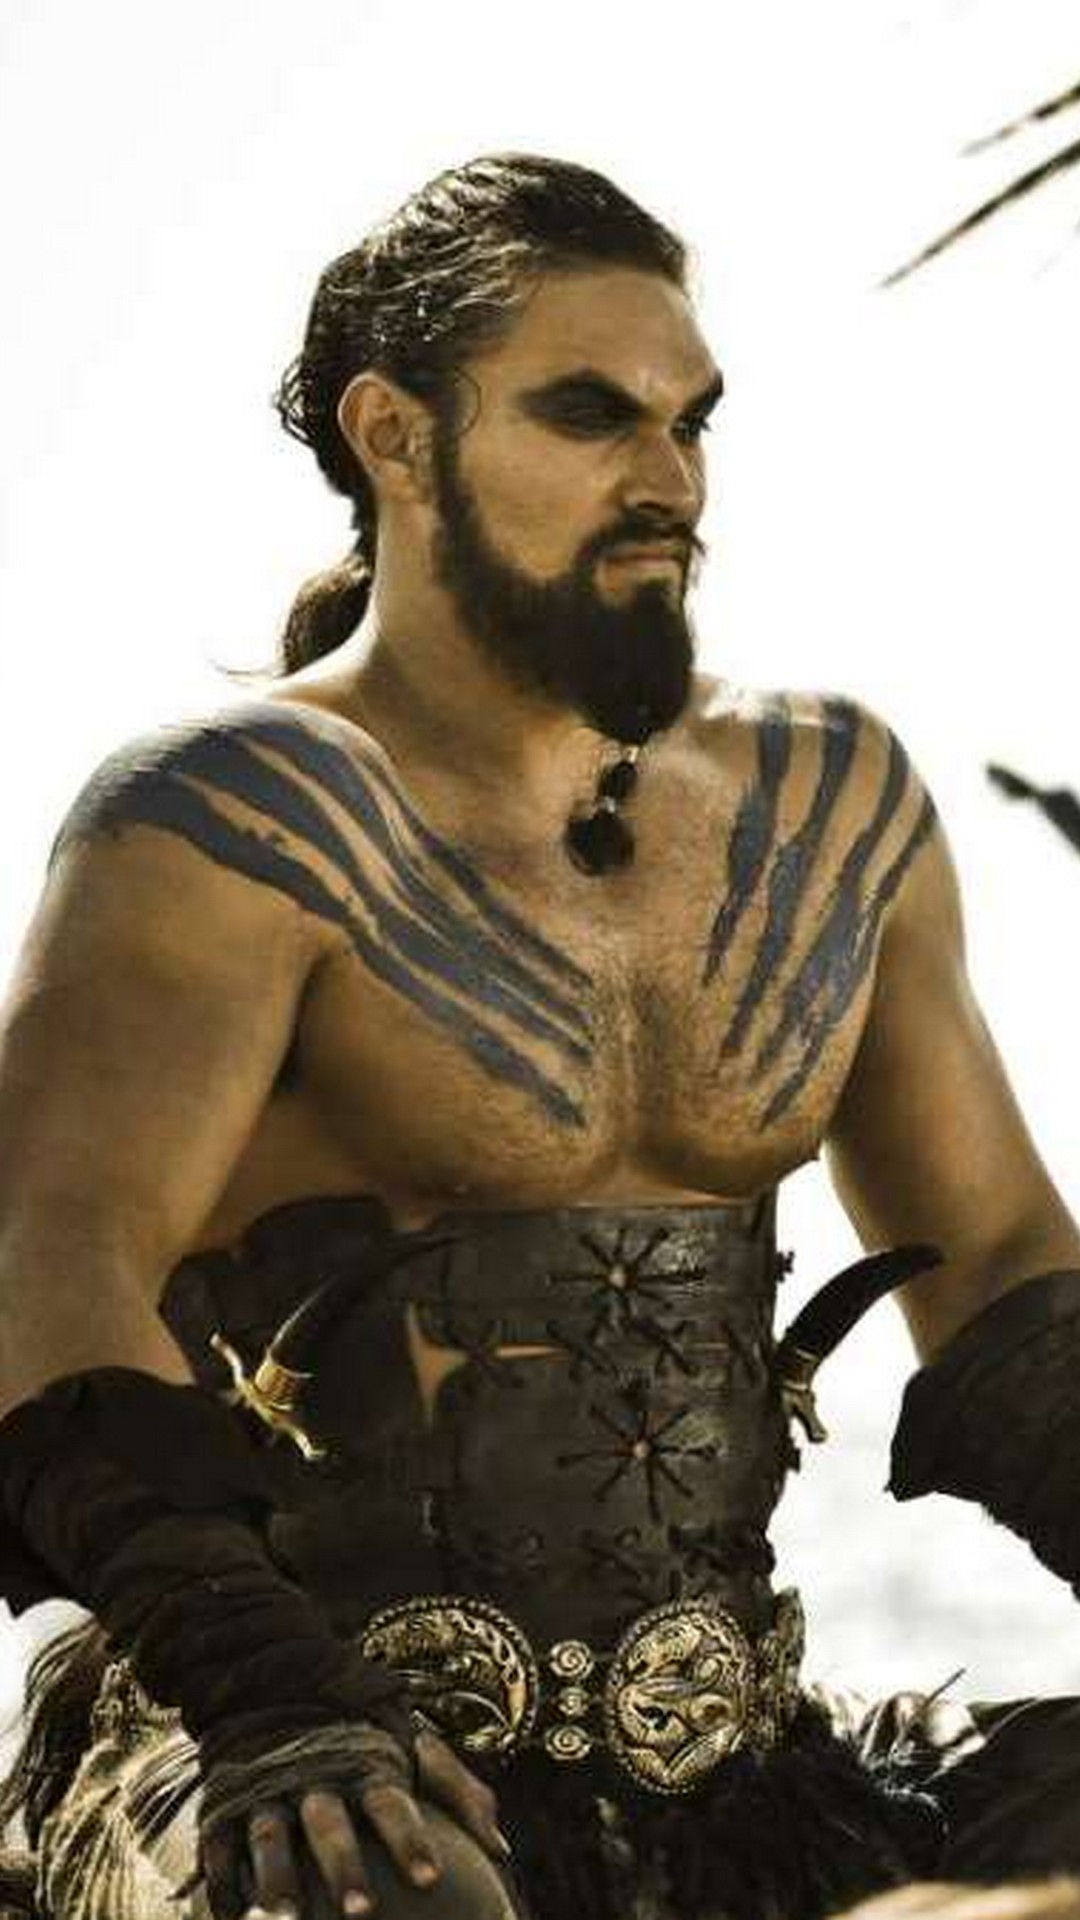 Khal Drogo Game of Thrones iPhone Wallpaper With high-resolution 1080X1920 pixel. You can use this wallpaper for your iPhone 5, 6, 7, 8, X, XS, XR backgrounds, Mobile Screensaver, or iPad Lock Screen